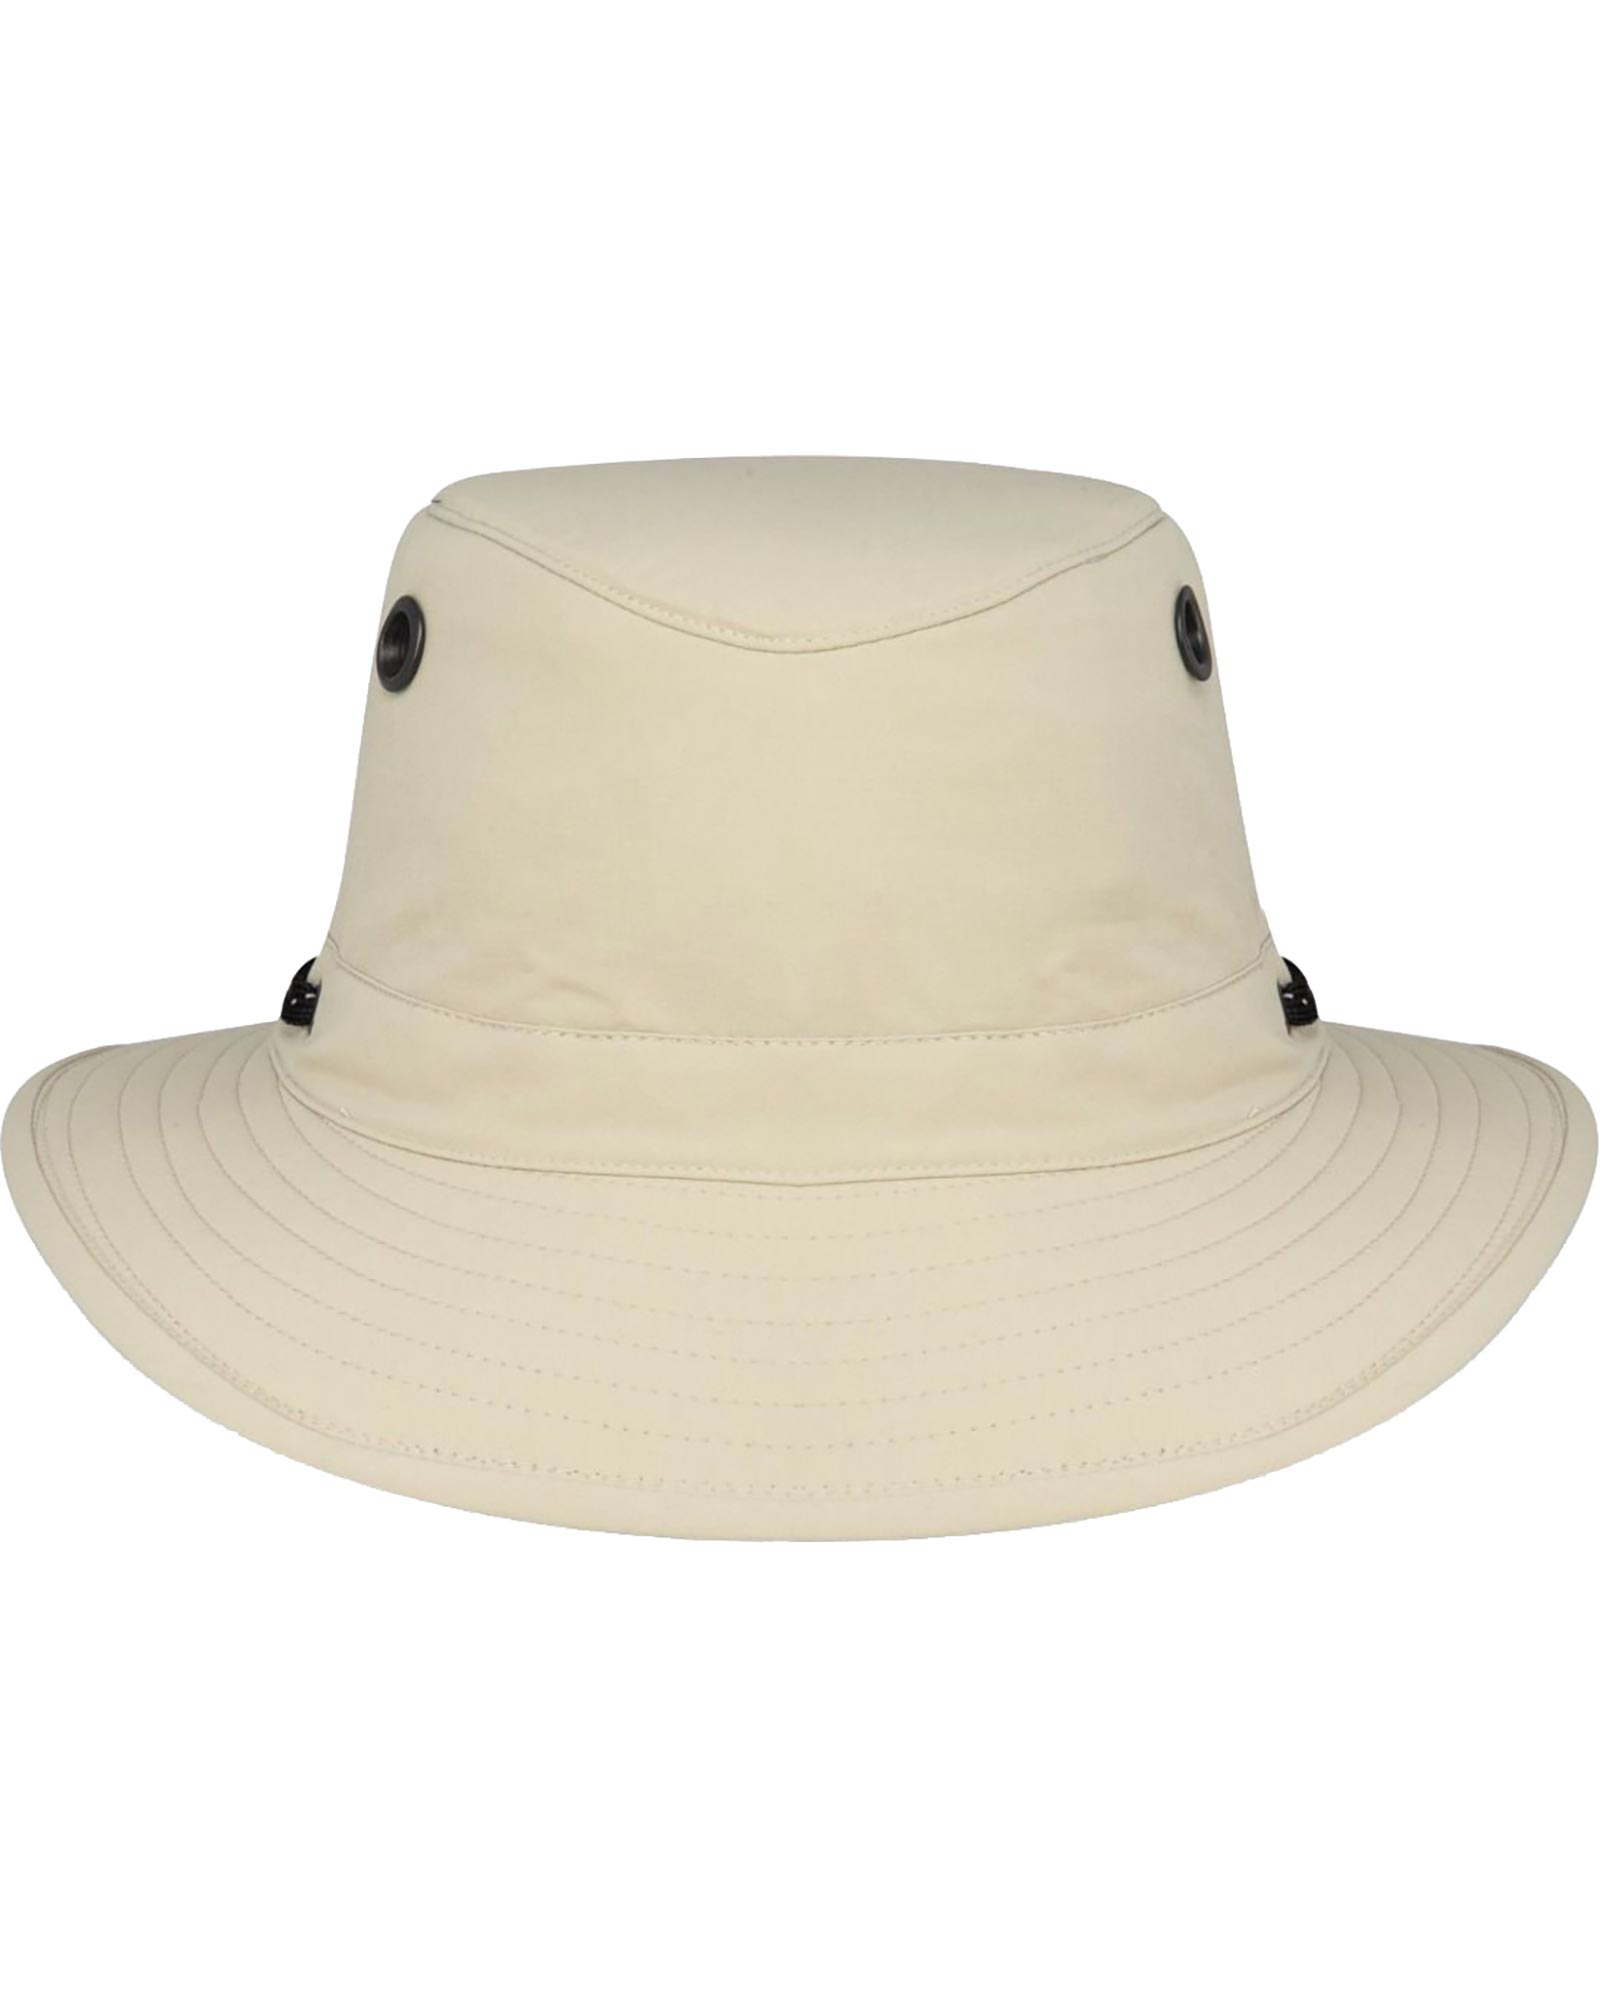 Tilley Breathable Bucket Hat - Stone/Taupe 7 1/8